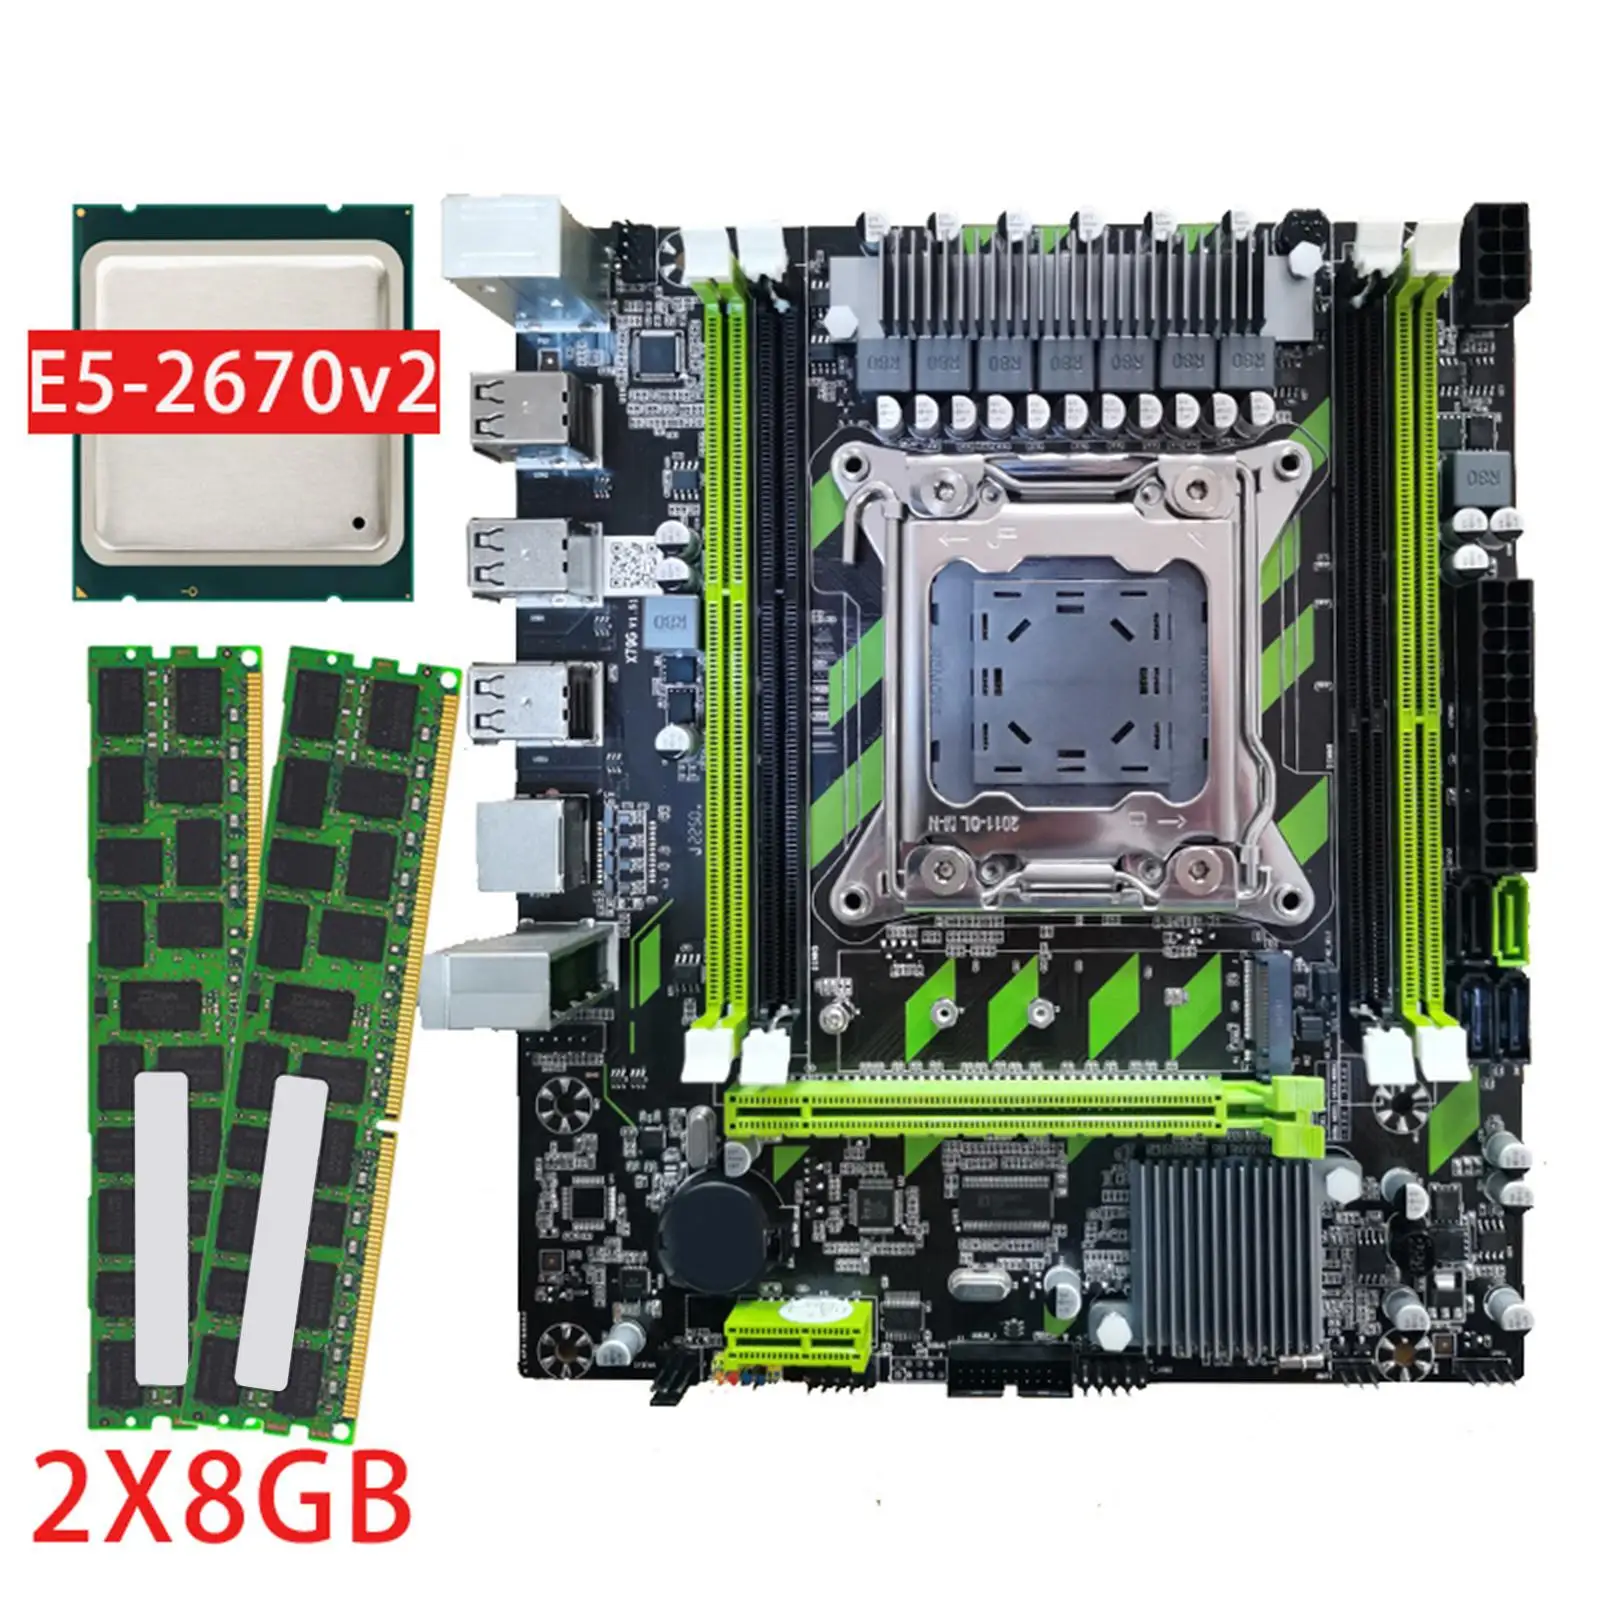 x79G Gaming Motherboard Max 64GB Memory 32GB/S Accessory Durable Replaces Easy Installation 4x SATA2.0 for E5-2670 V2 E5-2650 V2